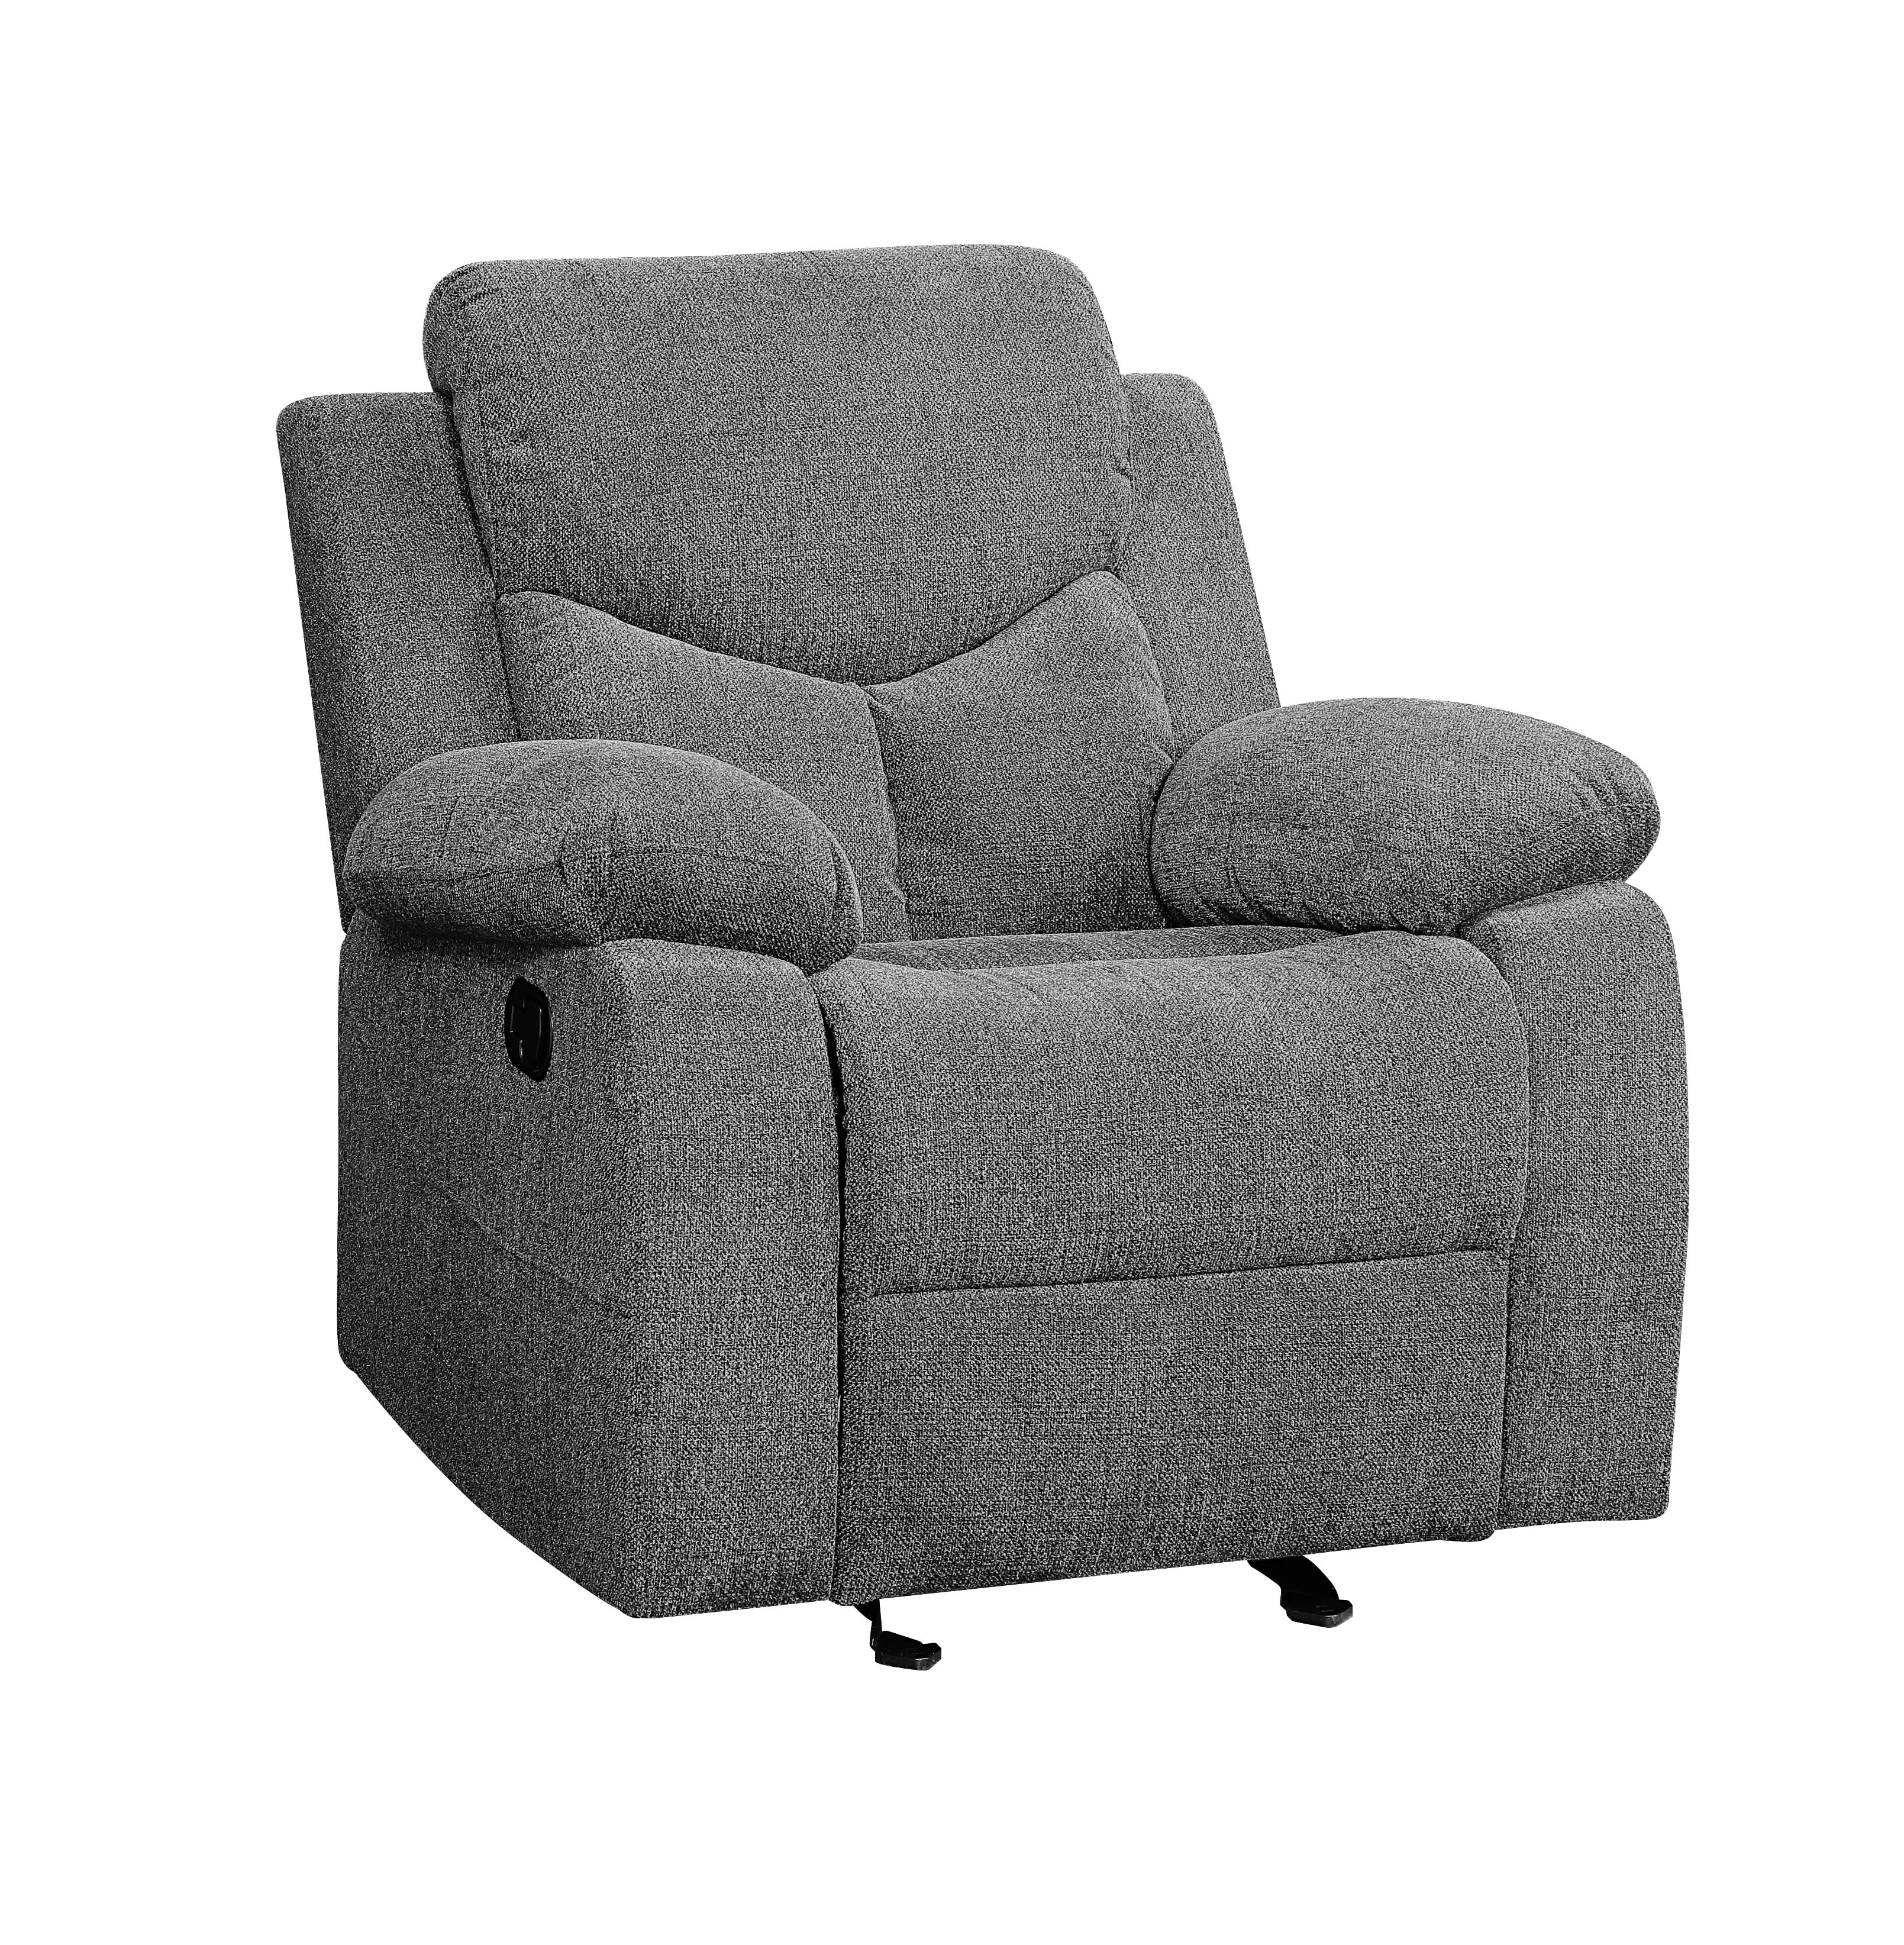 Picture of Acme Furniture 55442 38 x 38 x 39 in. Kalen Glider Recliner, Gray Chenille